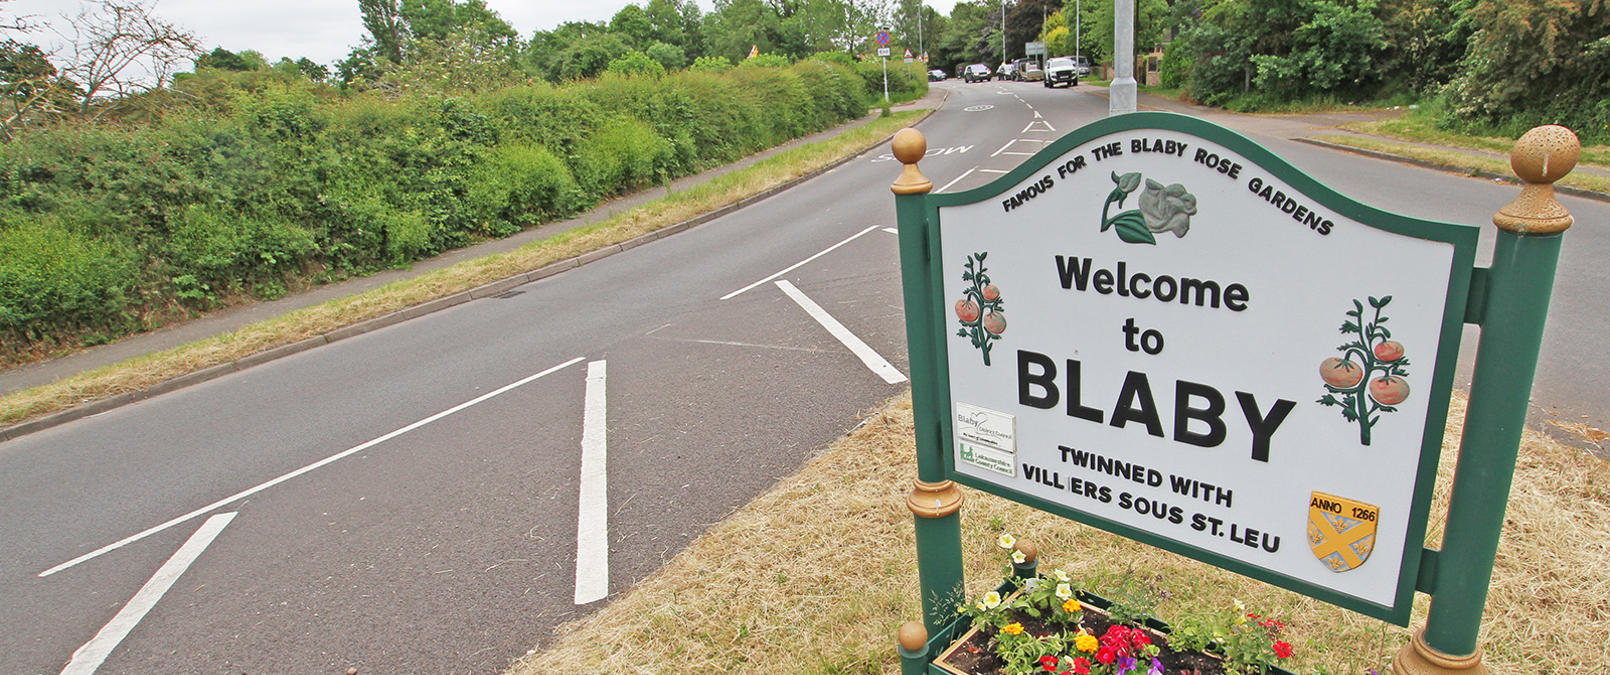 Blaby sign